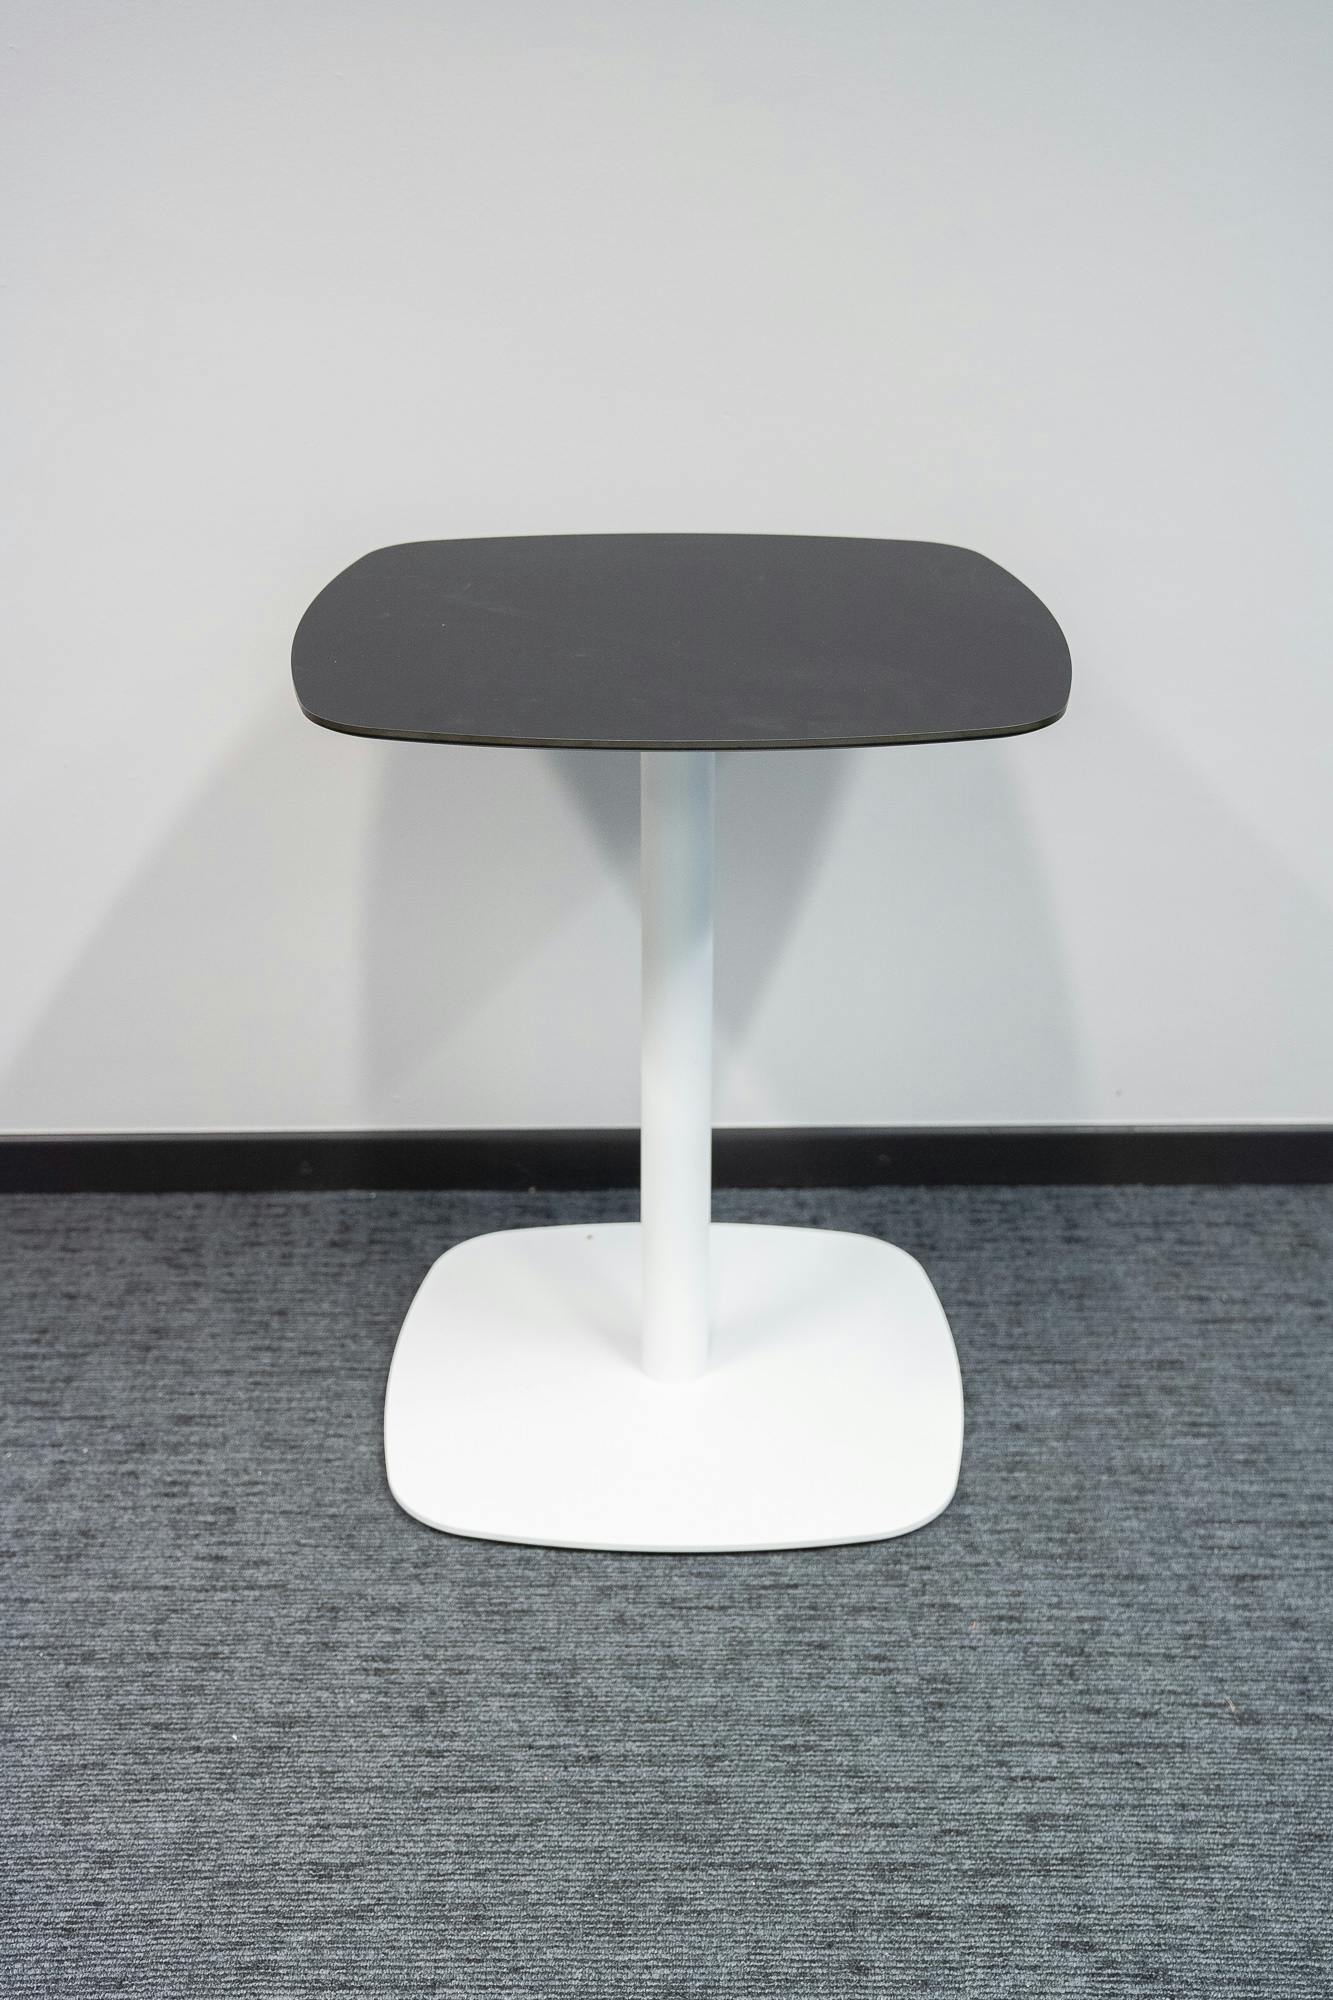 Black and white square iron table designed by Estudi Manel Molina - Second hand quality "Tables" - Relieve Furniture